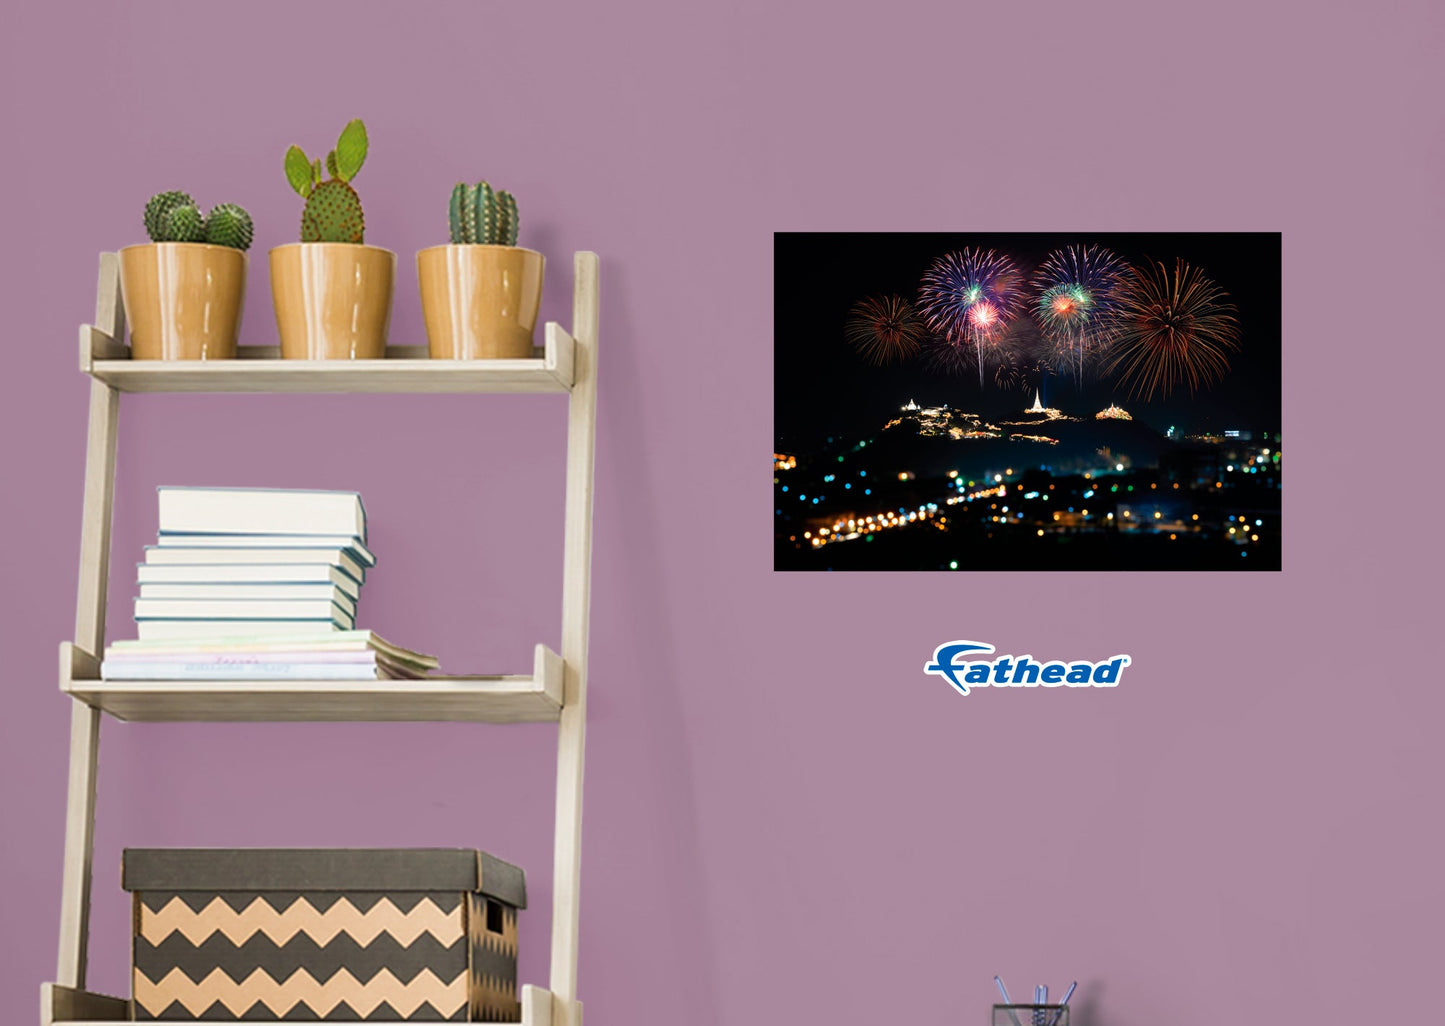 New Year: Colorful Fireworks Poster - Removable Adhesive Decal